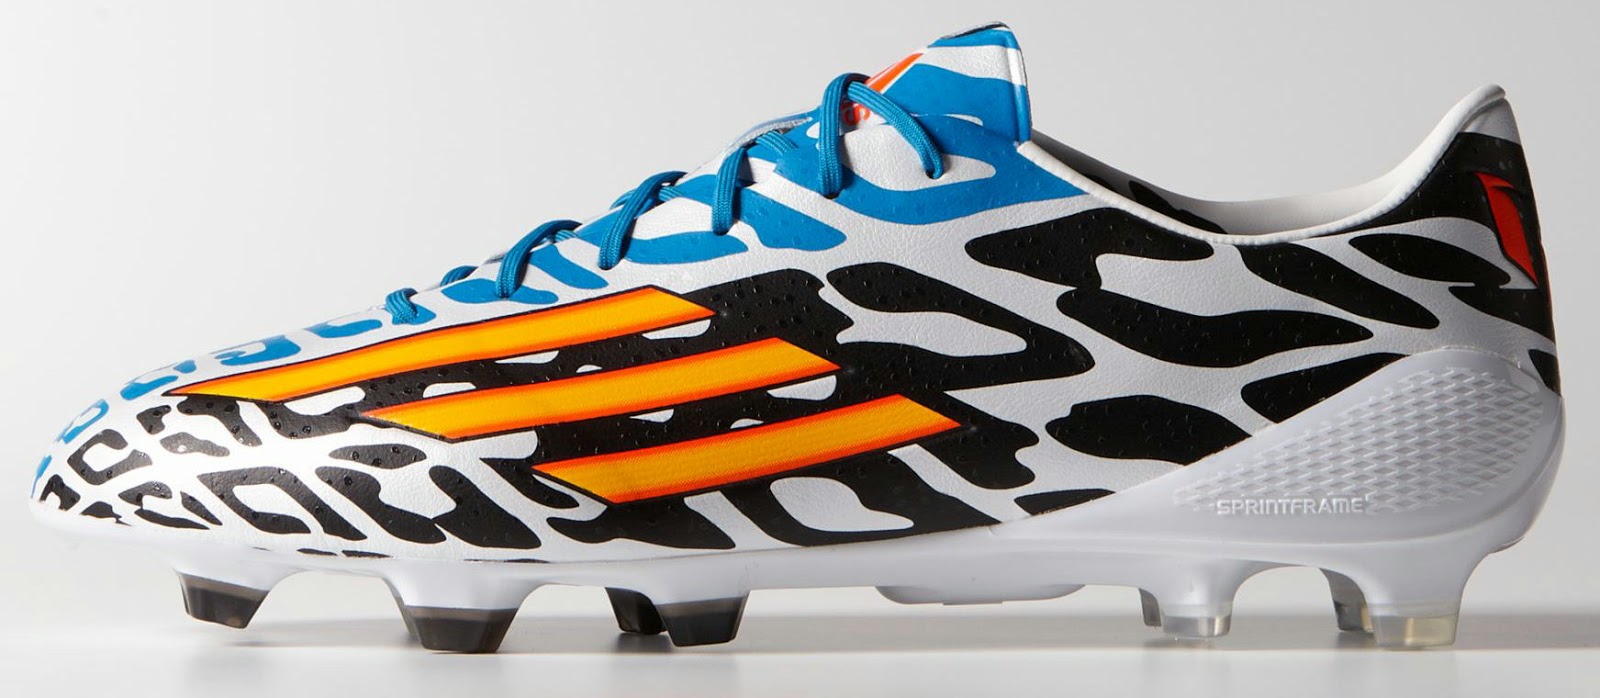 adidas messi cleats world cup